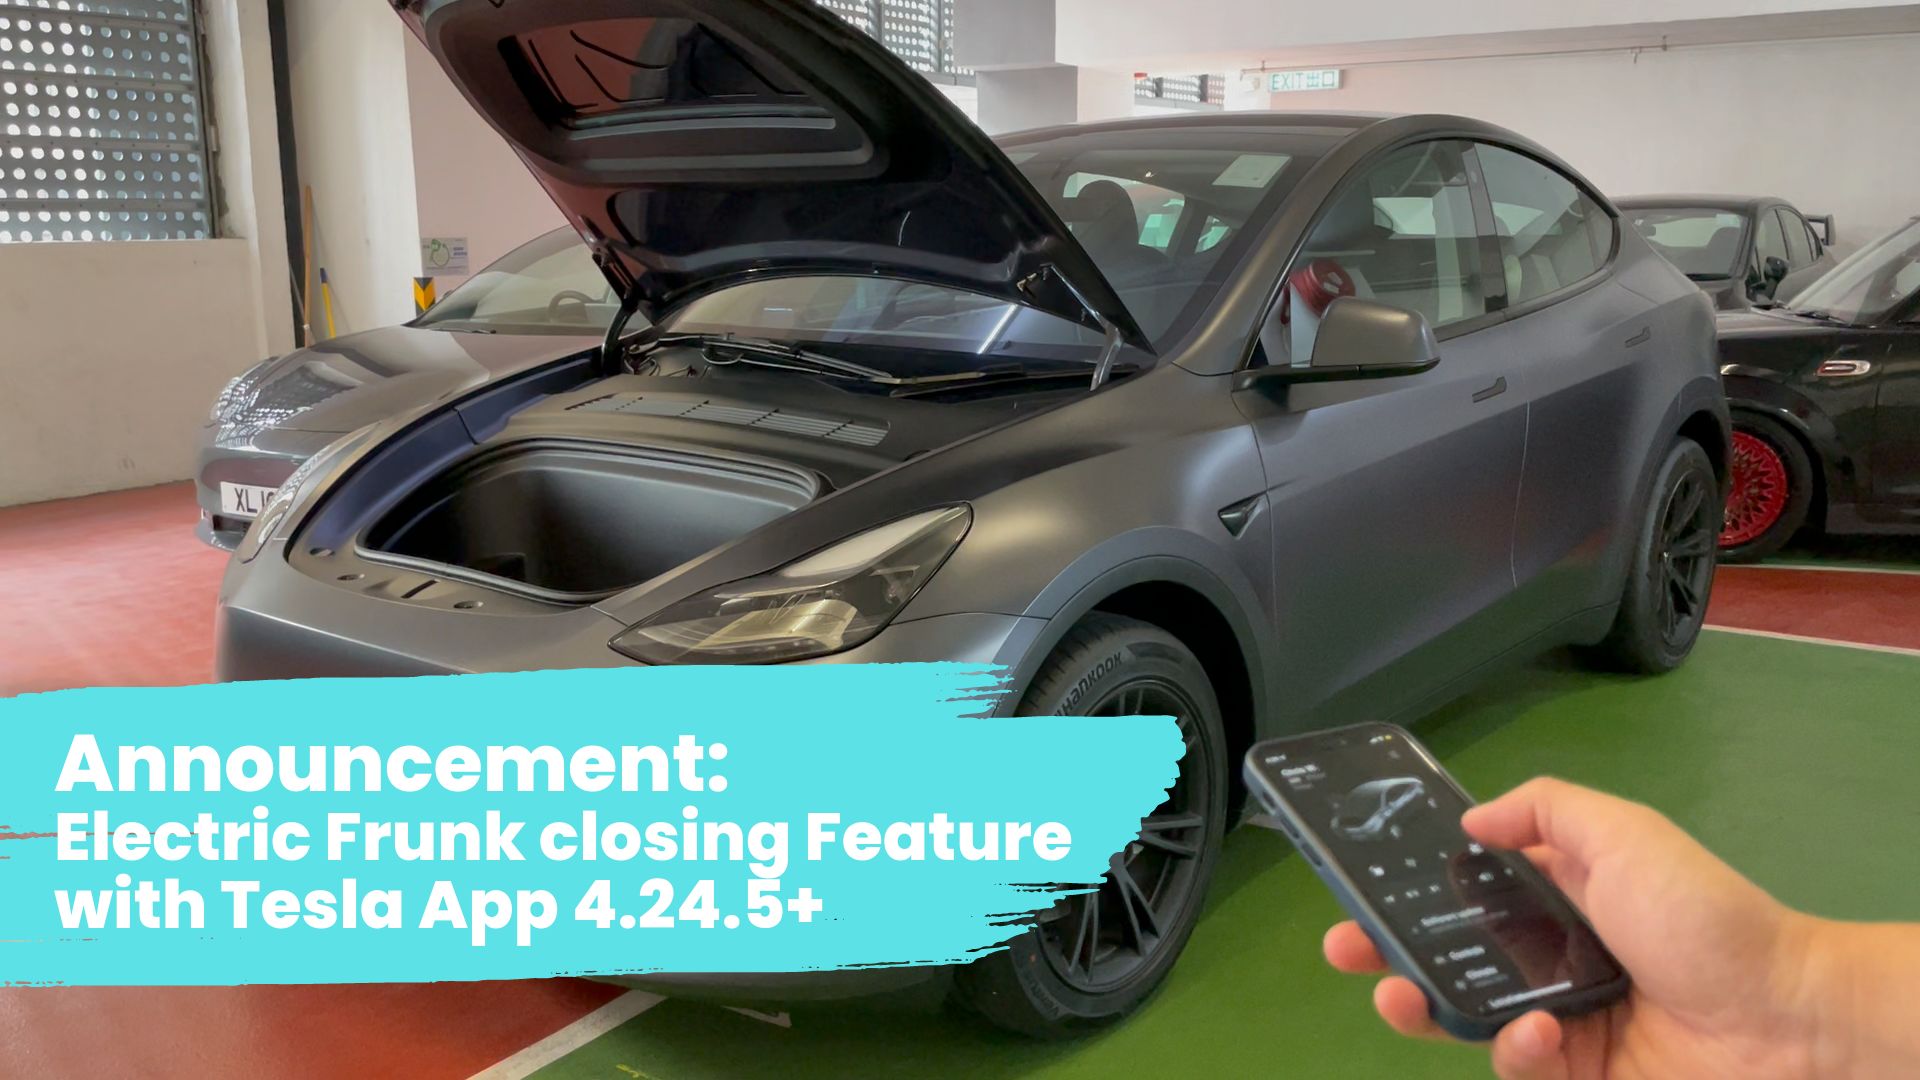 2023-09 Changes to Electric Liftgate Closing Feature with Tesla App Version 4.24.5